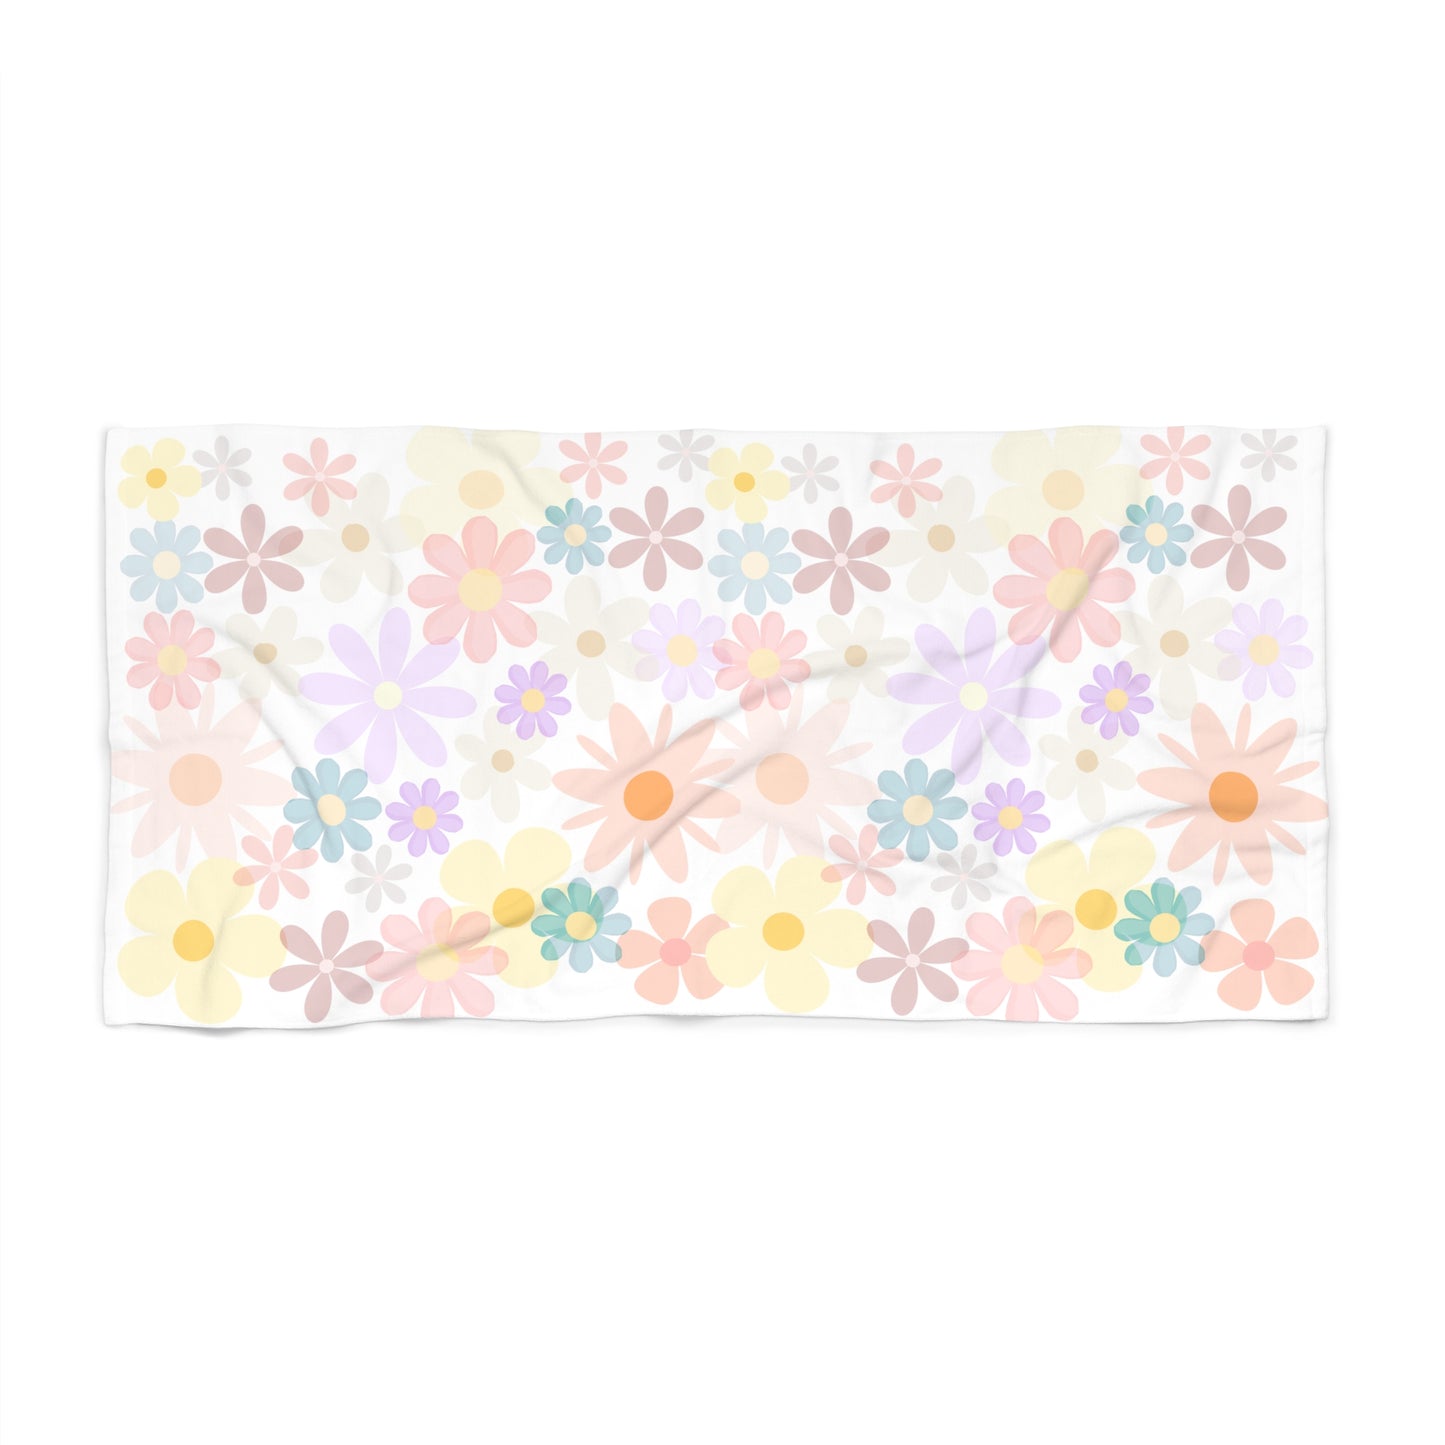 Flower Beach Towel Floral Gift for Her Pastel Summer Towel Beach Lover Gift Pool Towel Summer Vacation Towel